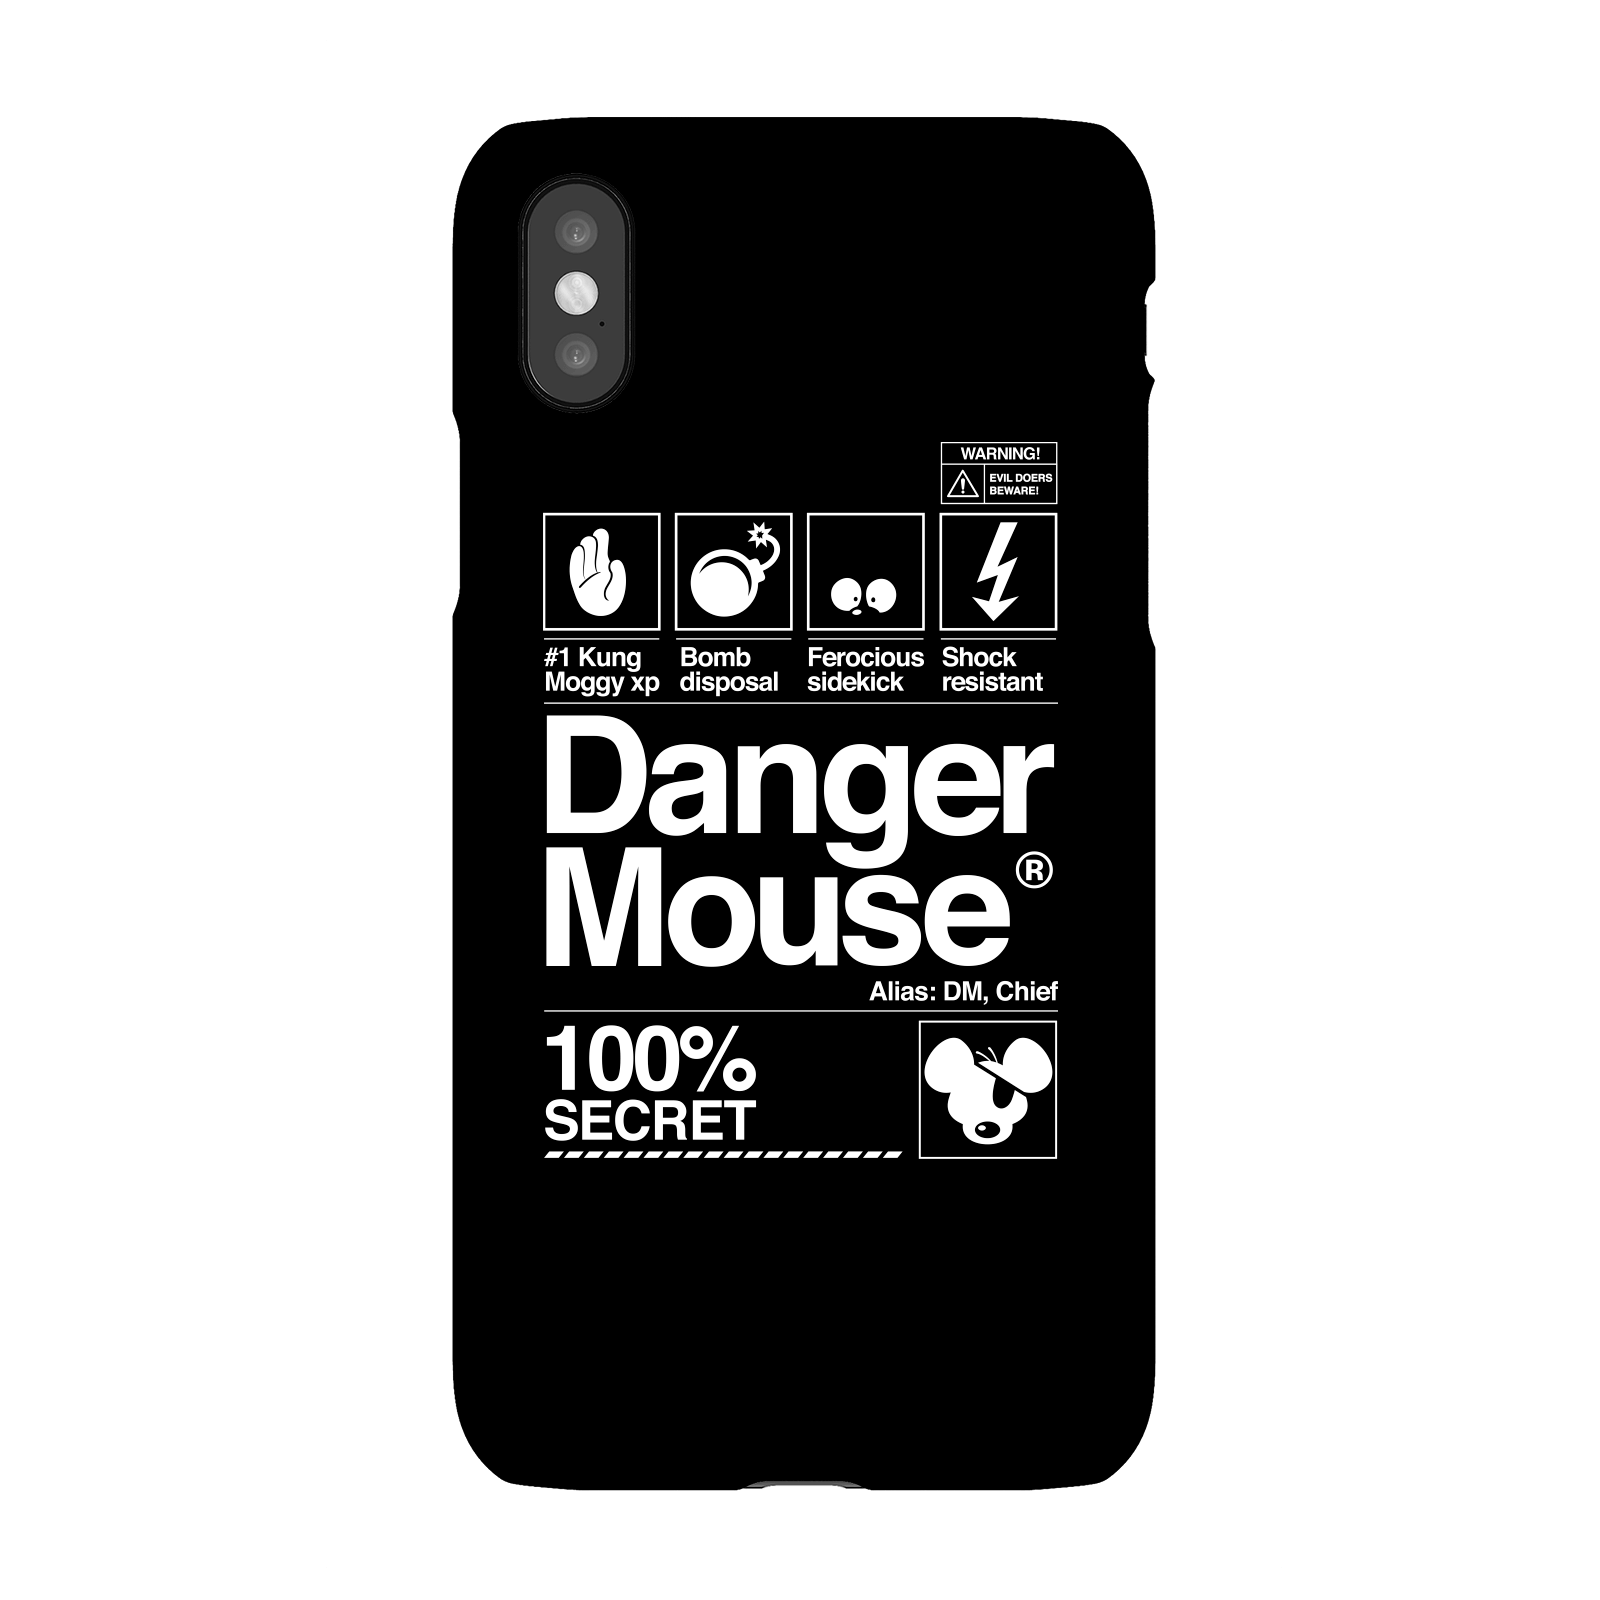 Danger Mouse 100% Secret Phone Case for iPhone and Android - iPhone X - Snap Case - Matte